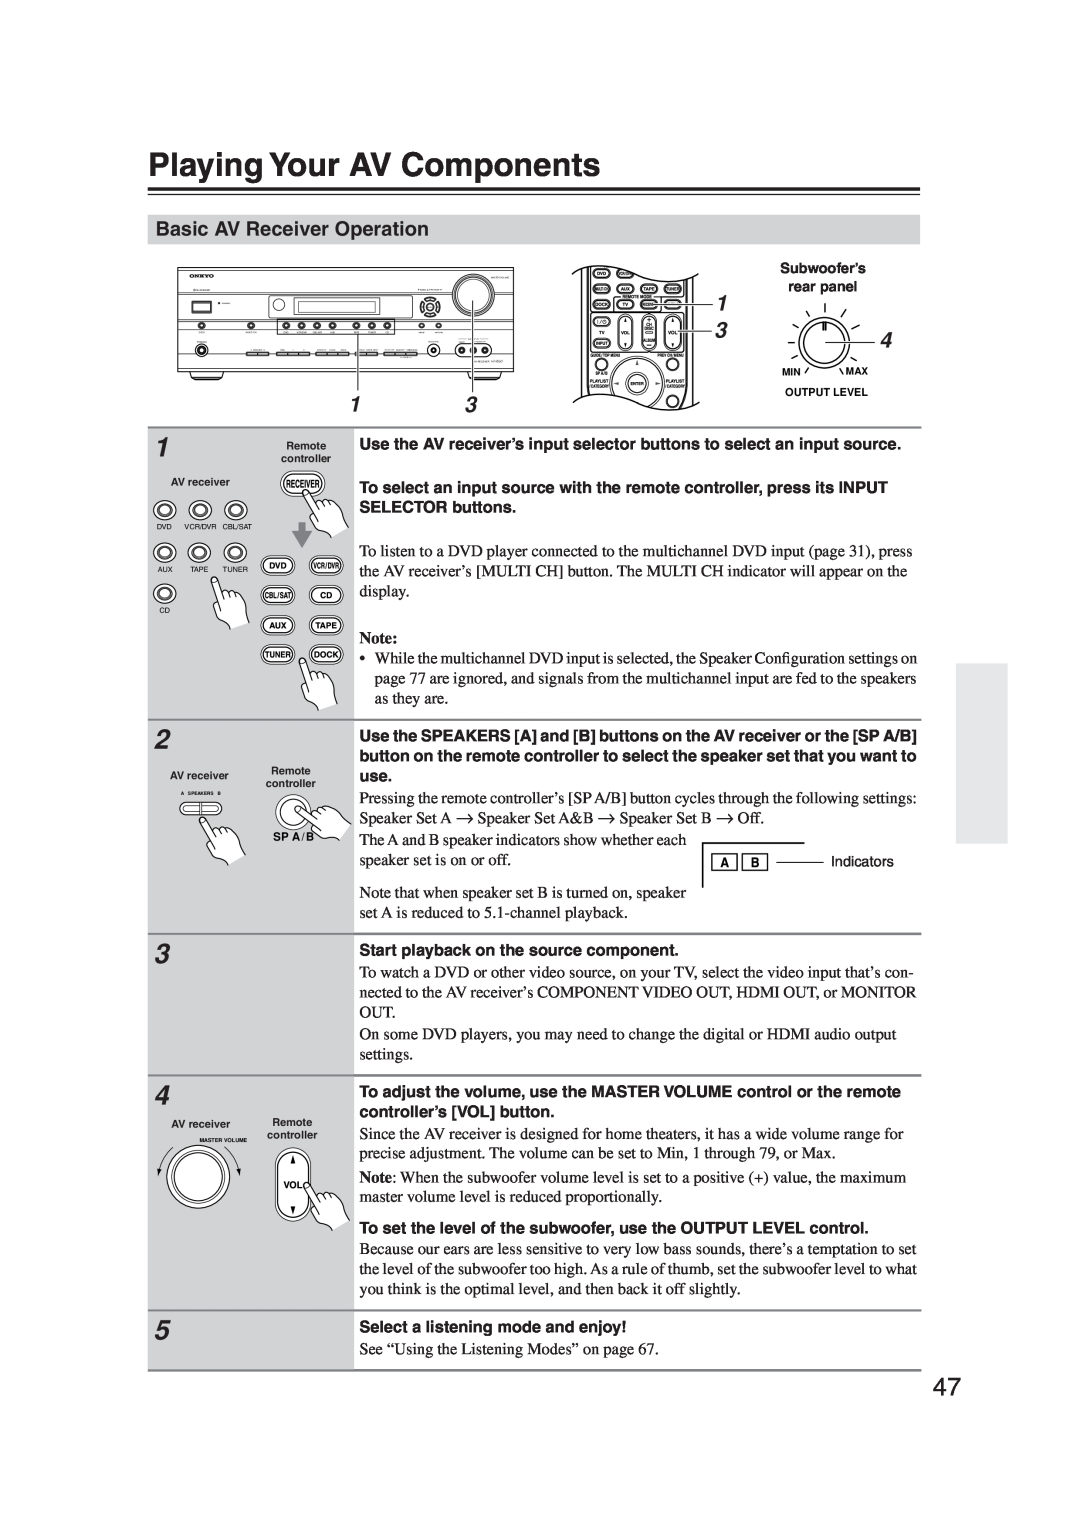 Onkyo S5100 Playing Your AV Components, Basic AV Receiver Operation, See “Using the Listening Modes” on page 